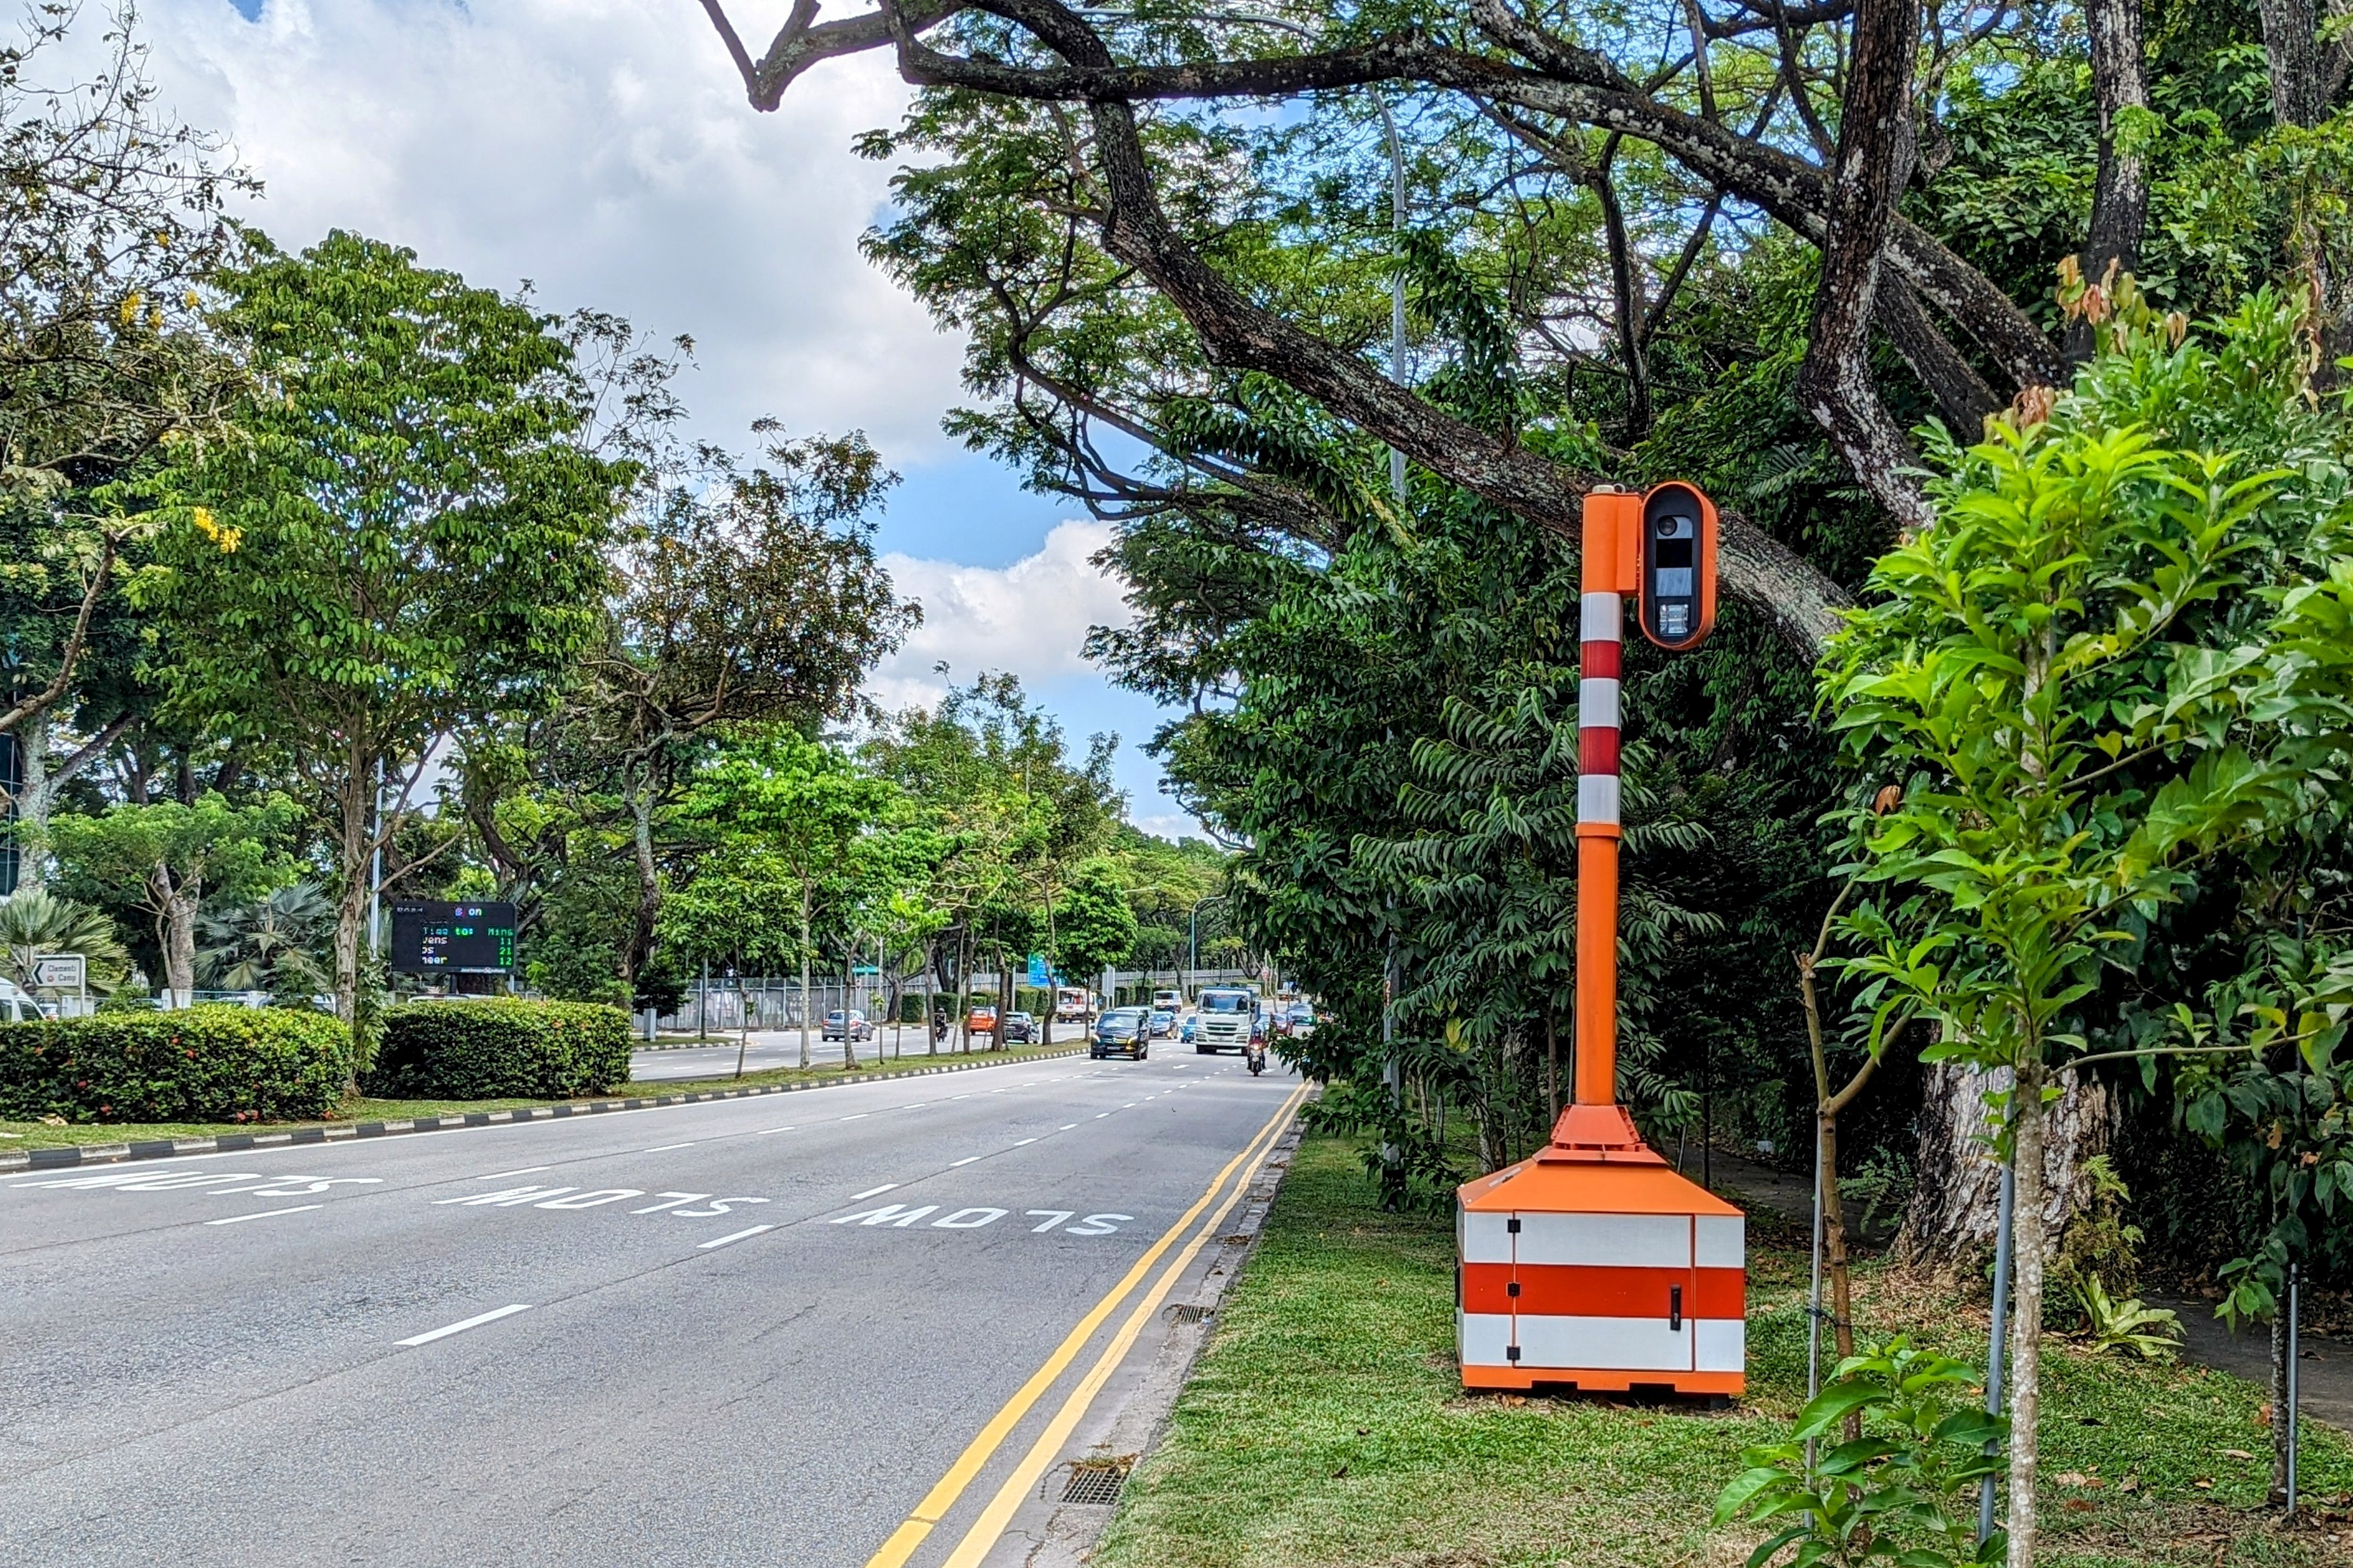 A Traffic Police camera along the road